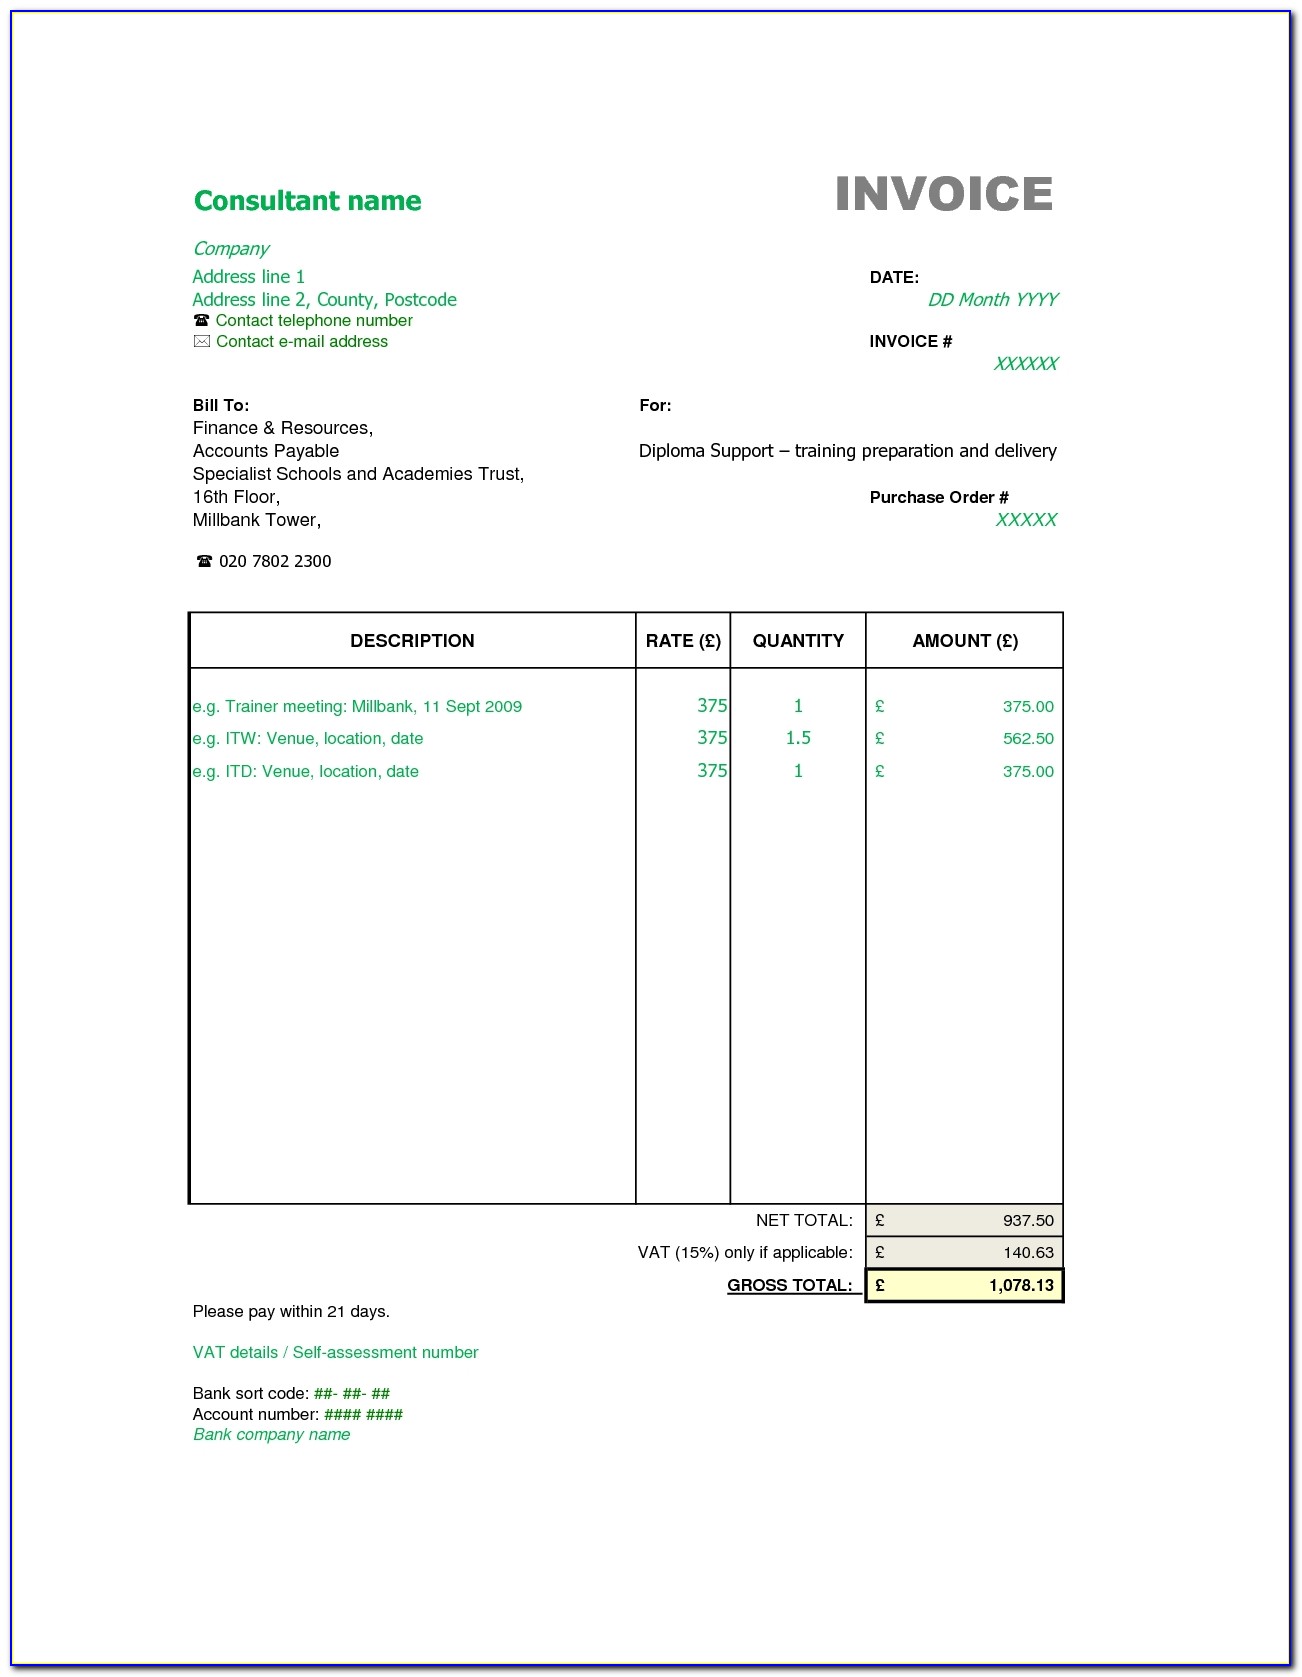 Sample Consultant Invoice Excel Based Consulting Invoice Template Consultant Invoice Format